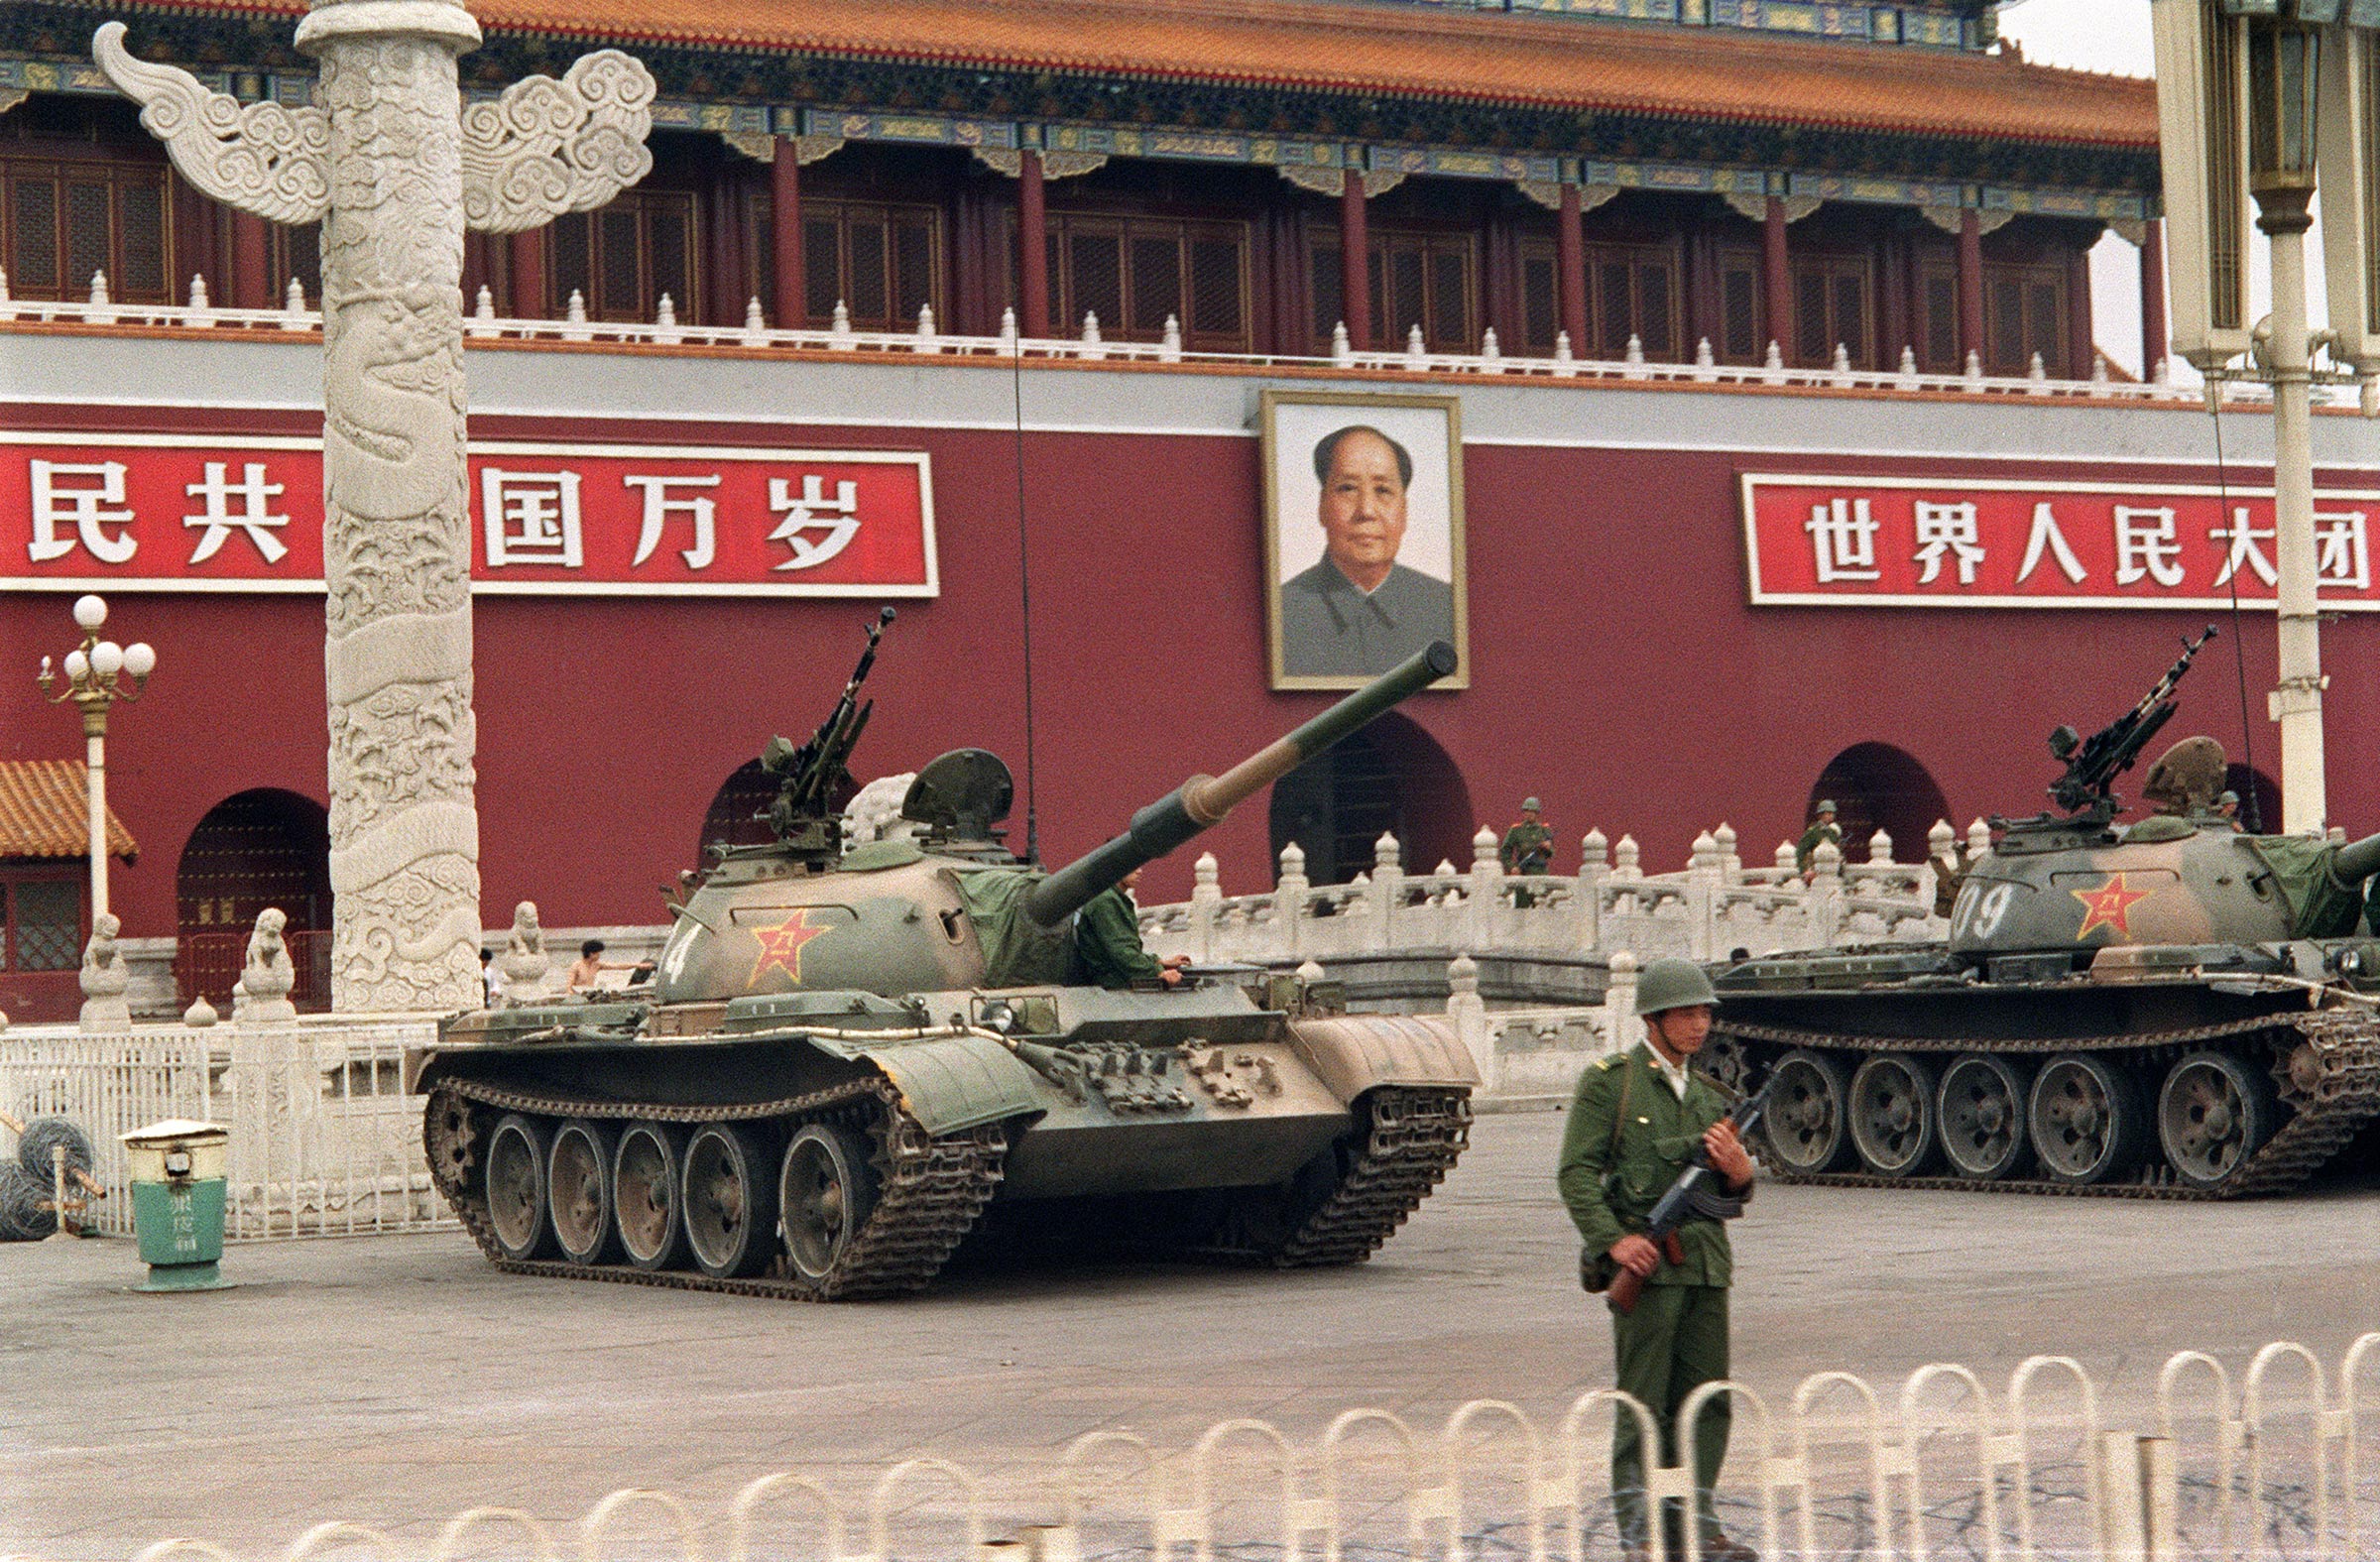 People's Liberation Army tanks are positioned at Tiananmen Square on June 9, 1989. (Catherine Henriette—AFP/Getty Images)